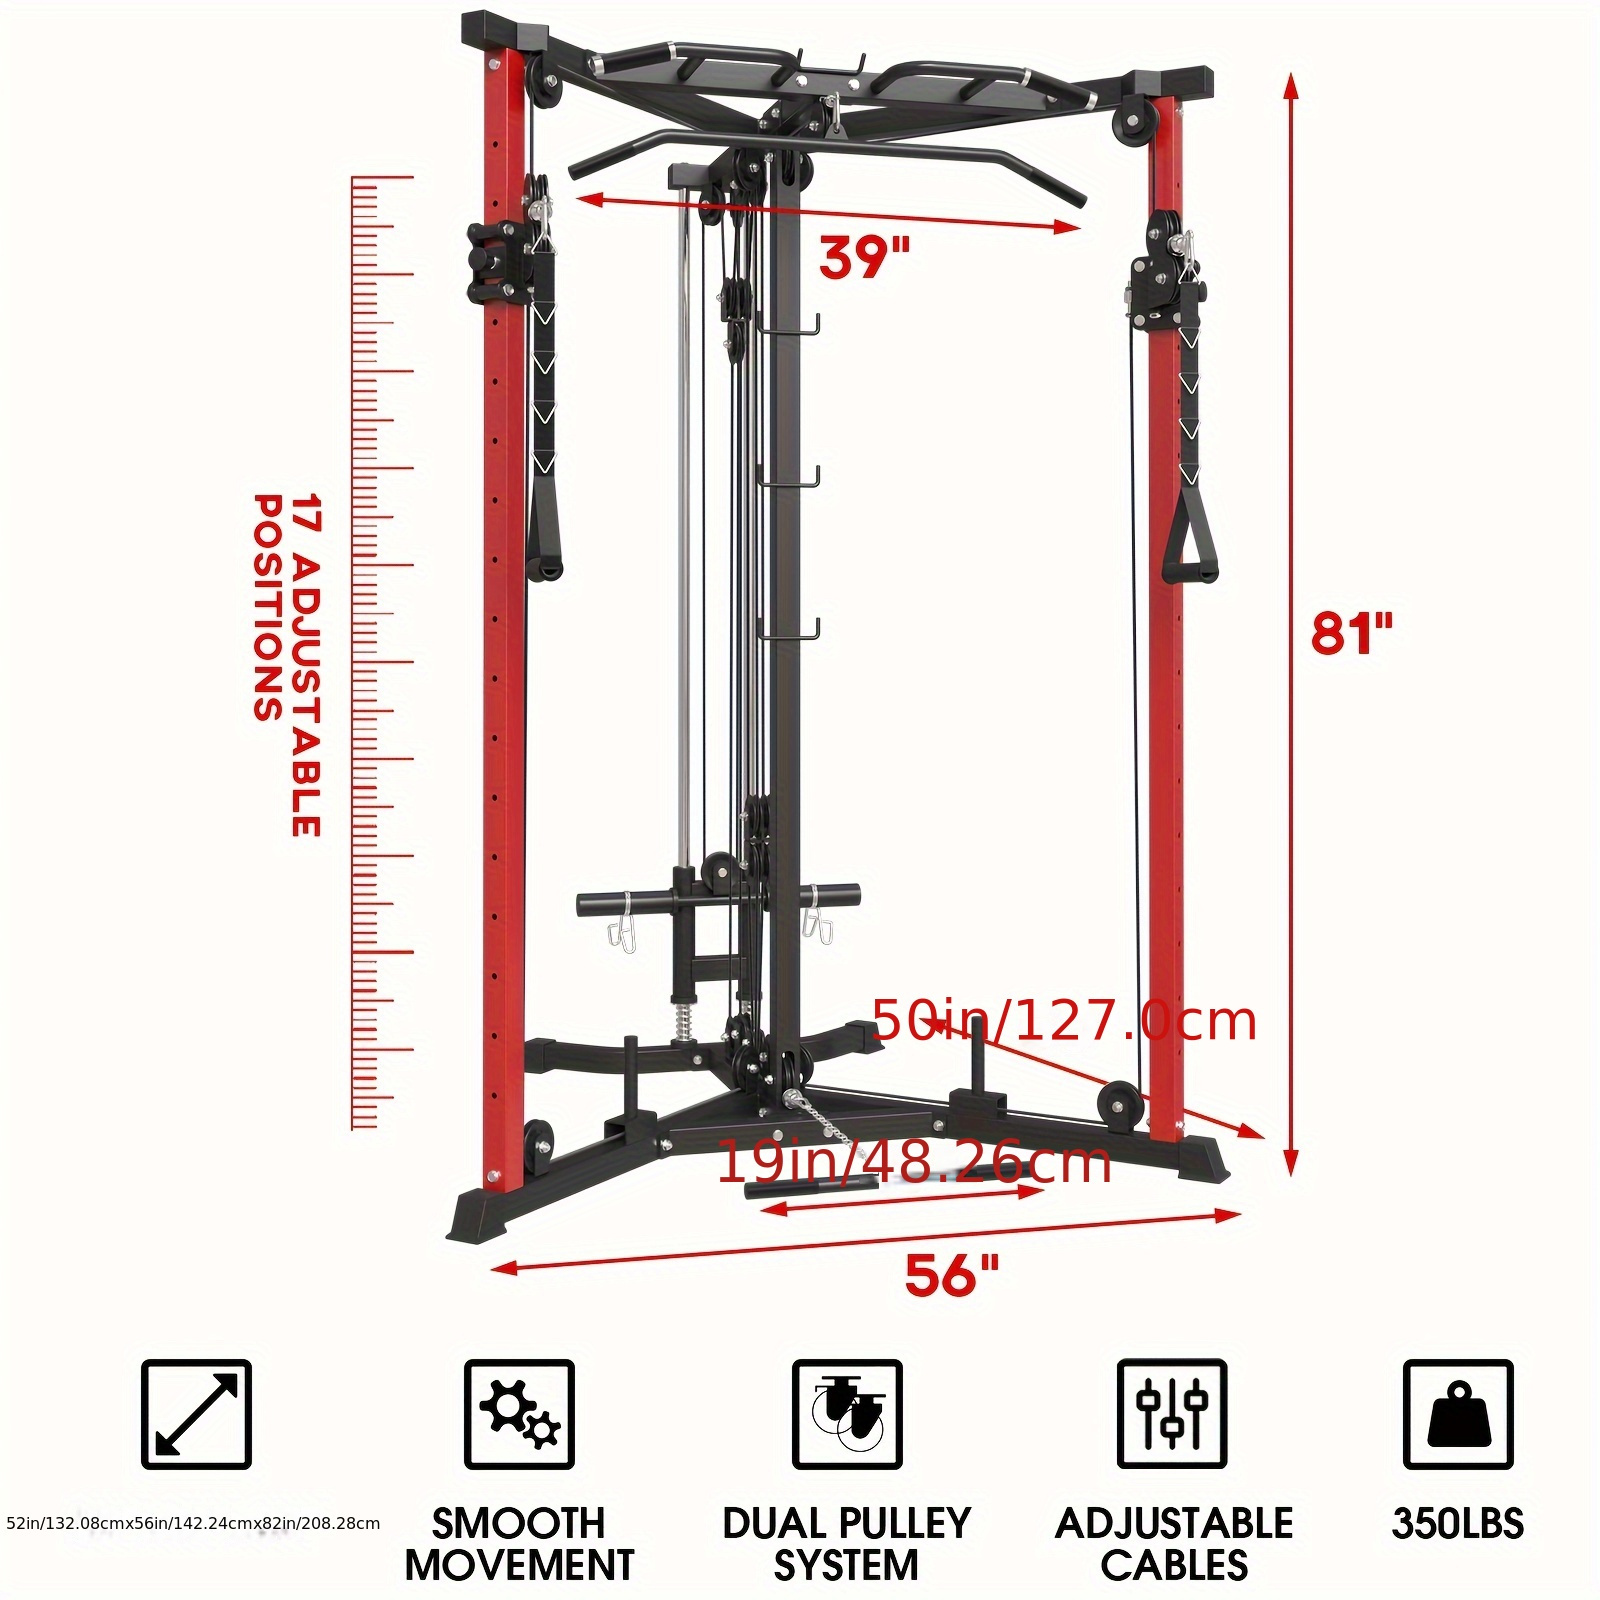 

Cable Crossover Machine, 350lbs Weight Capacity, With 17 Adjustable Positions, , Cable Bars And Pivoting Pulley System, For Chest Muscles Building, Strength Training